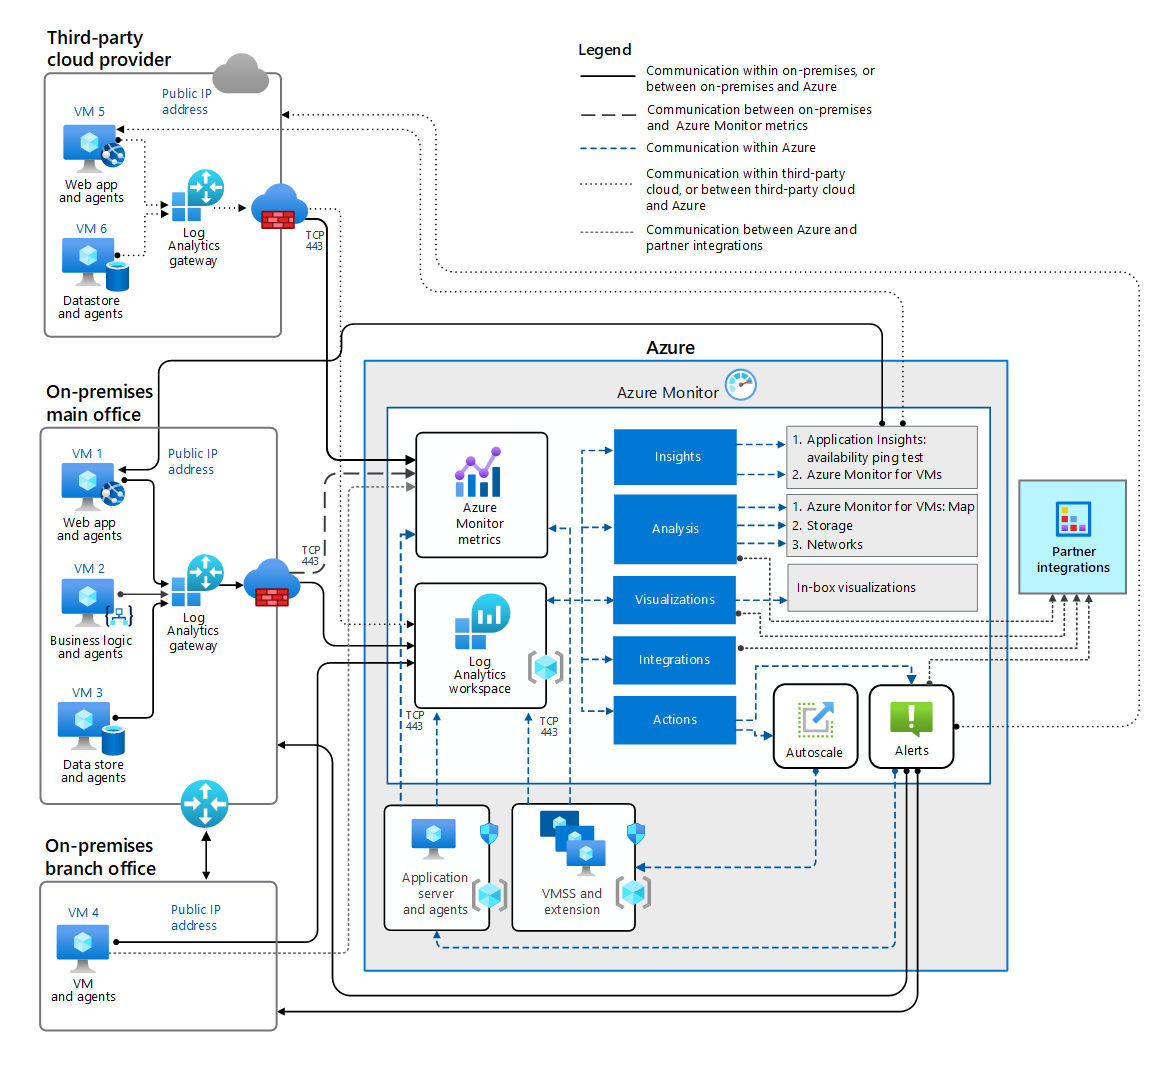 Diagram illustrating monitoring and availability functions of Azure Monitor for OS workloads in Azure, in on-premises environments, and with third-party cloud providers. Data is being sent into a Log Analytics workspace. The data is used by Application Insights, Analysis, Visualization, Alerts, and Autoscale services as part of Azure Monitor